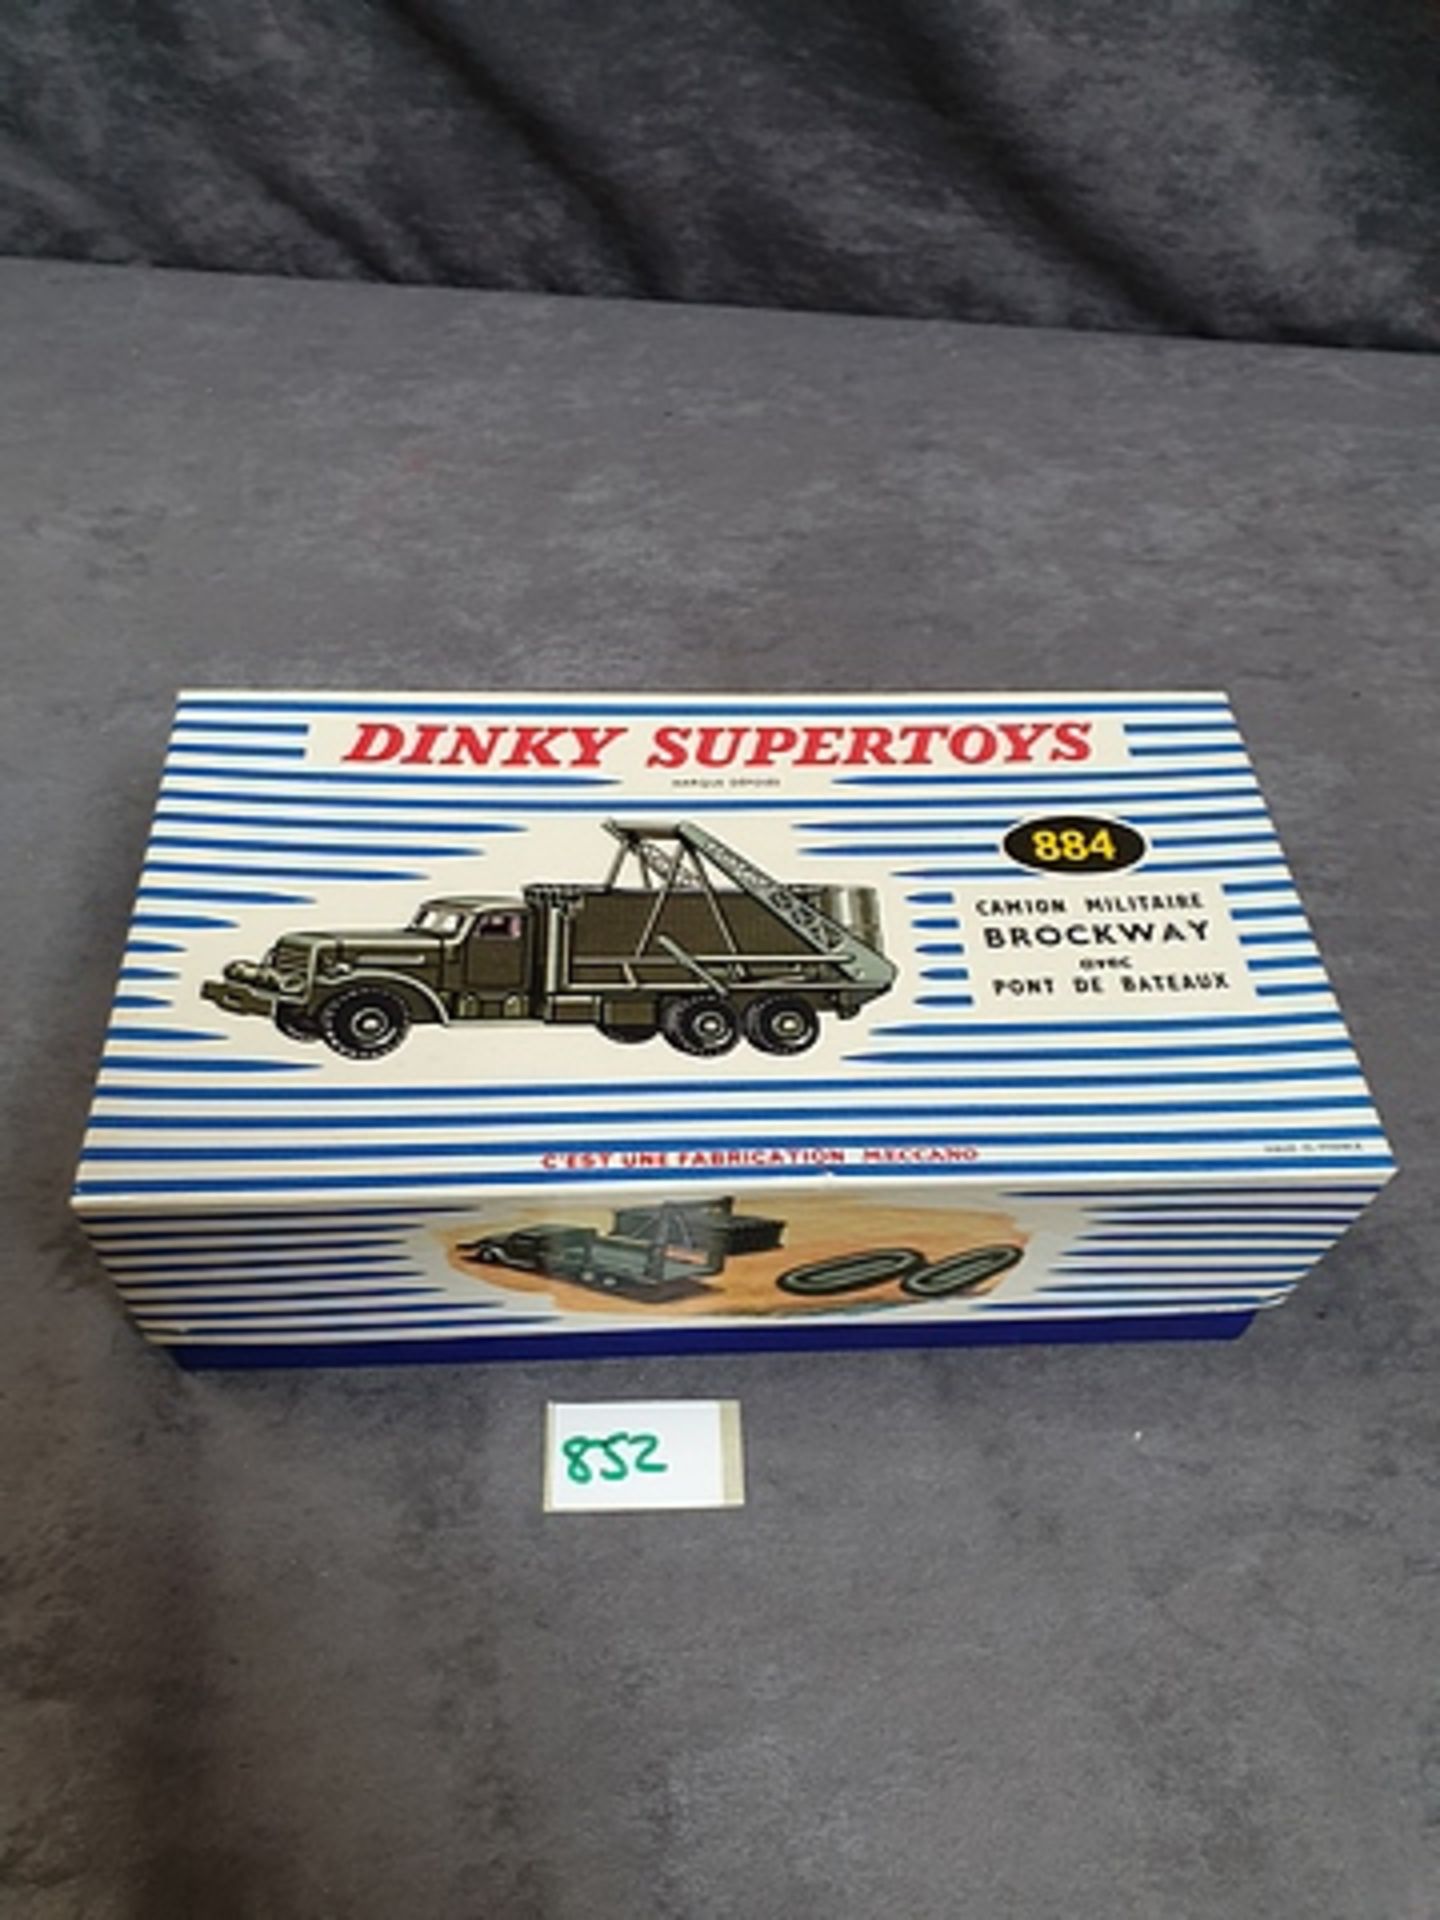 Dinky Diecast Toys # 884 French Brockway Military Truck With Bridge Of Boats in a crisp Box - Image 2 of 2